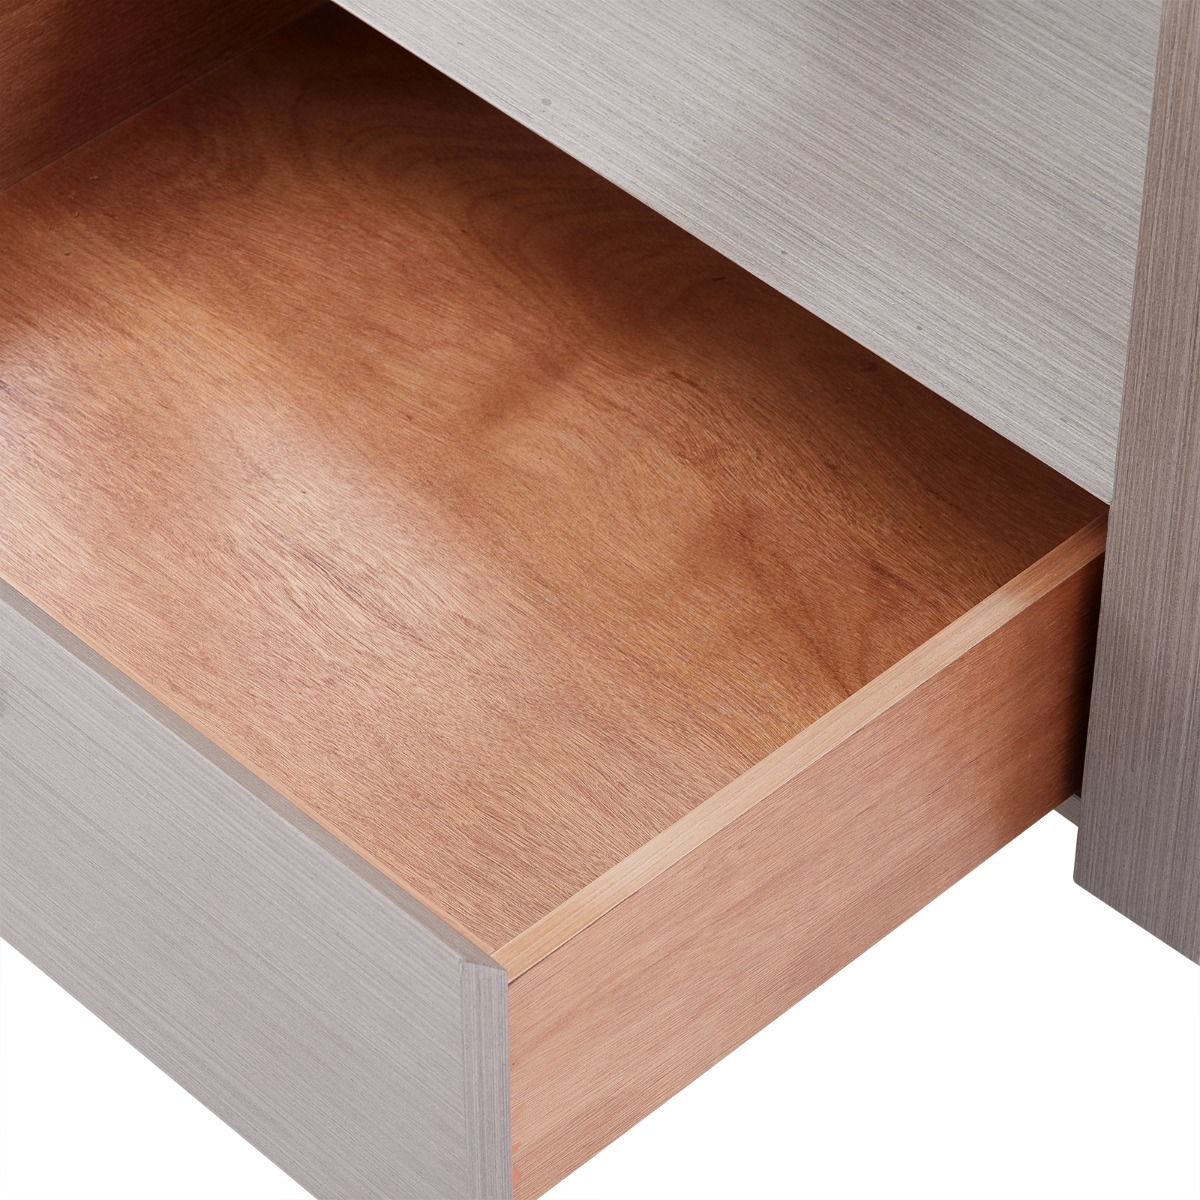 Layan 1-Drawer Side Table - Taupe Grey